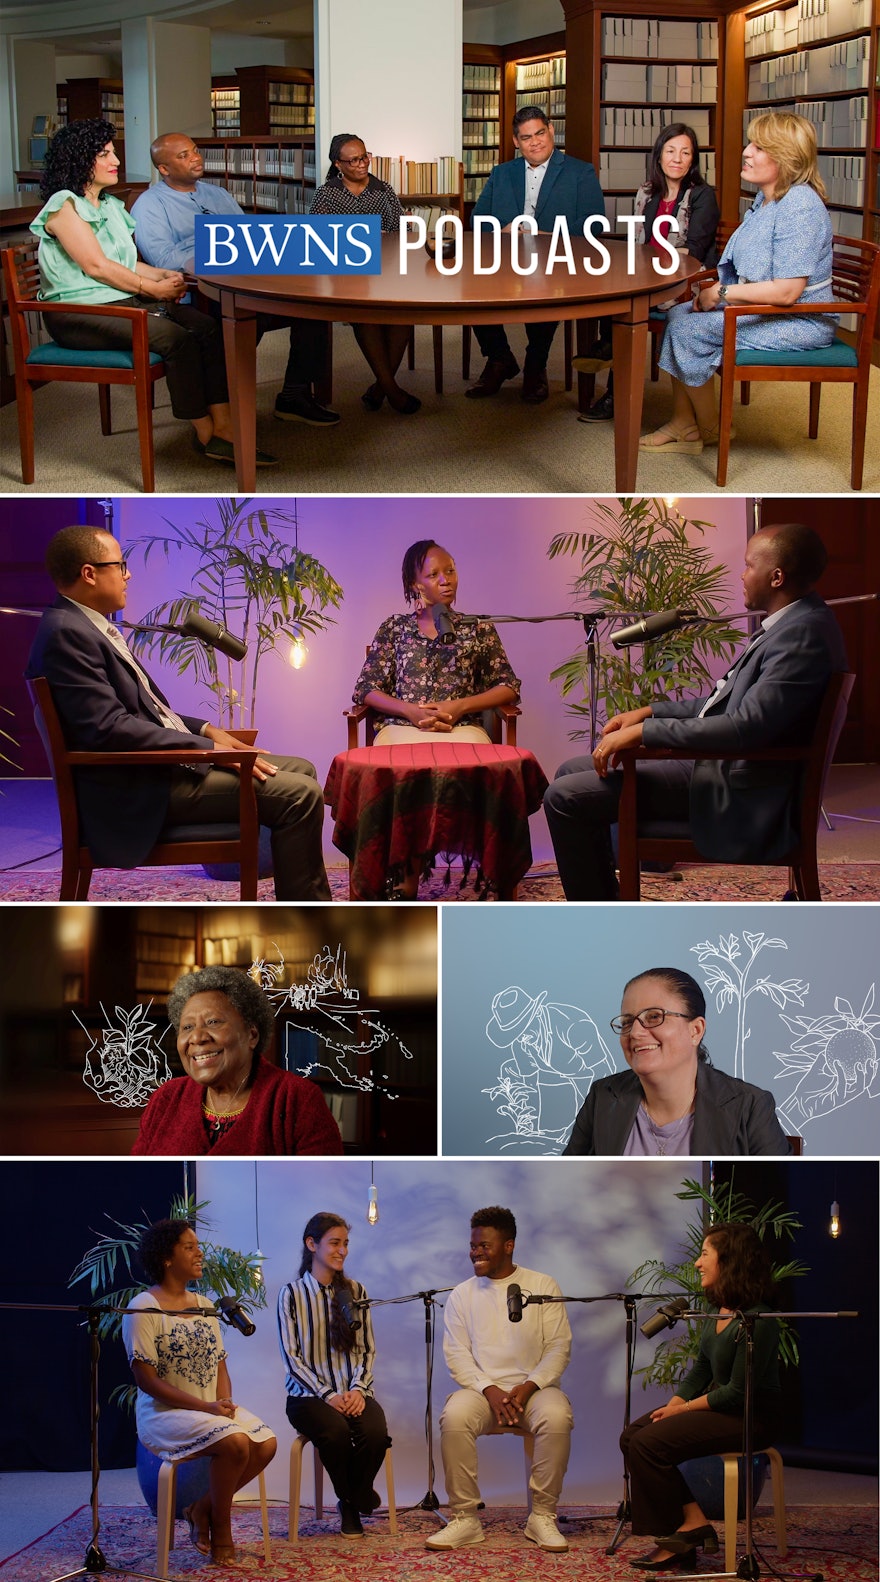 The News Service introduced two new series of video podcasts, one titled, In Conversation, and another titled, Insights from the Field. Episodes of these podcasts explored Bahá’í moral and spiritual education initiatives in communities around the globe, emerging social action endeavors in PNG, and FUNDAEC’s, a Bahá’í inspired organization, agricultural efforts in Colombia.